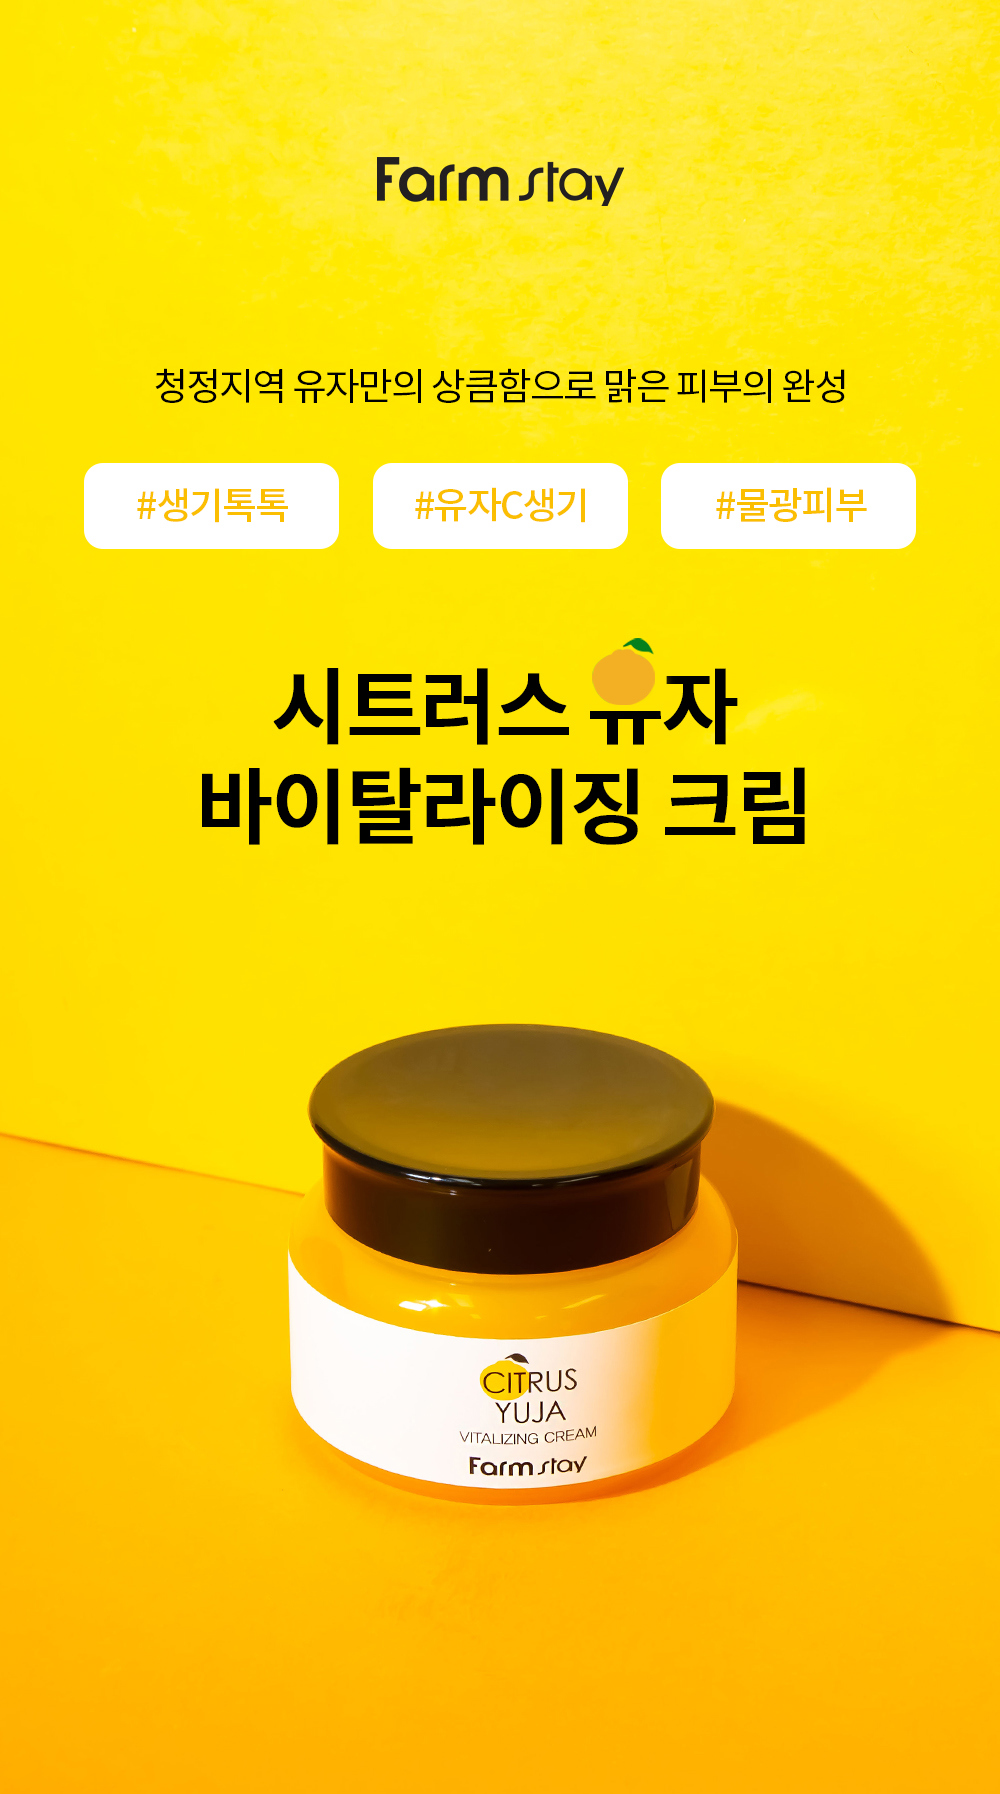 cosmetics yellow color image-S1L1